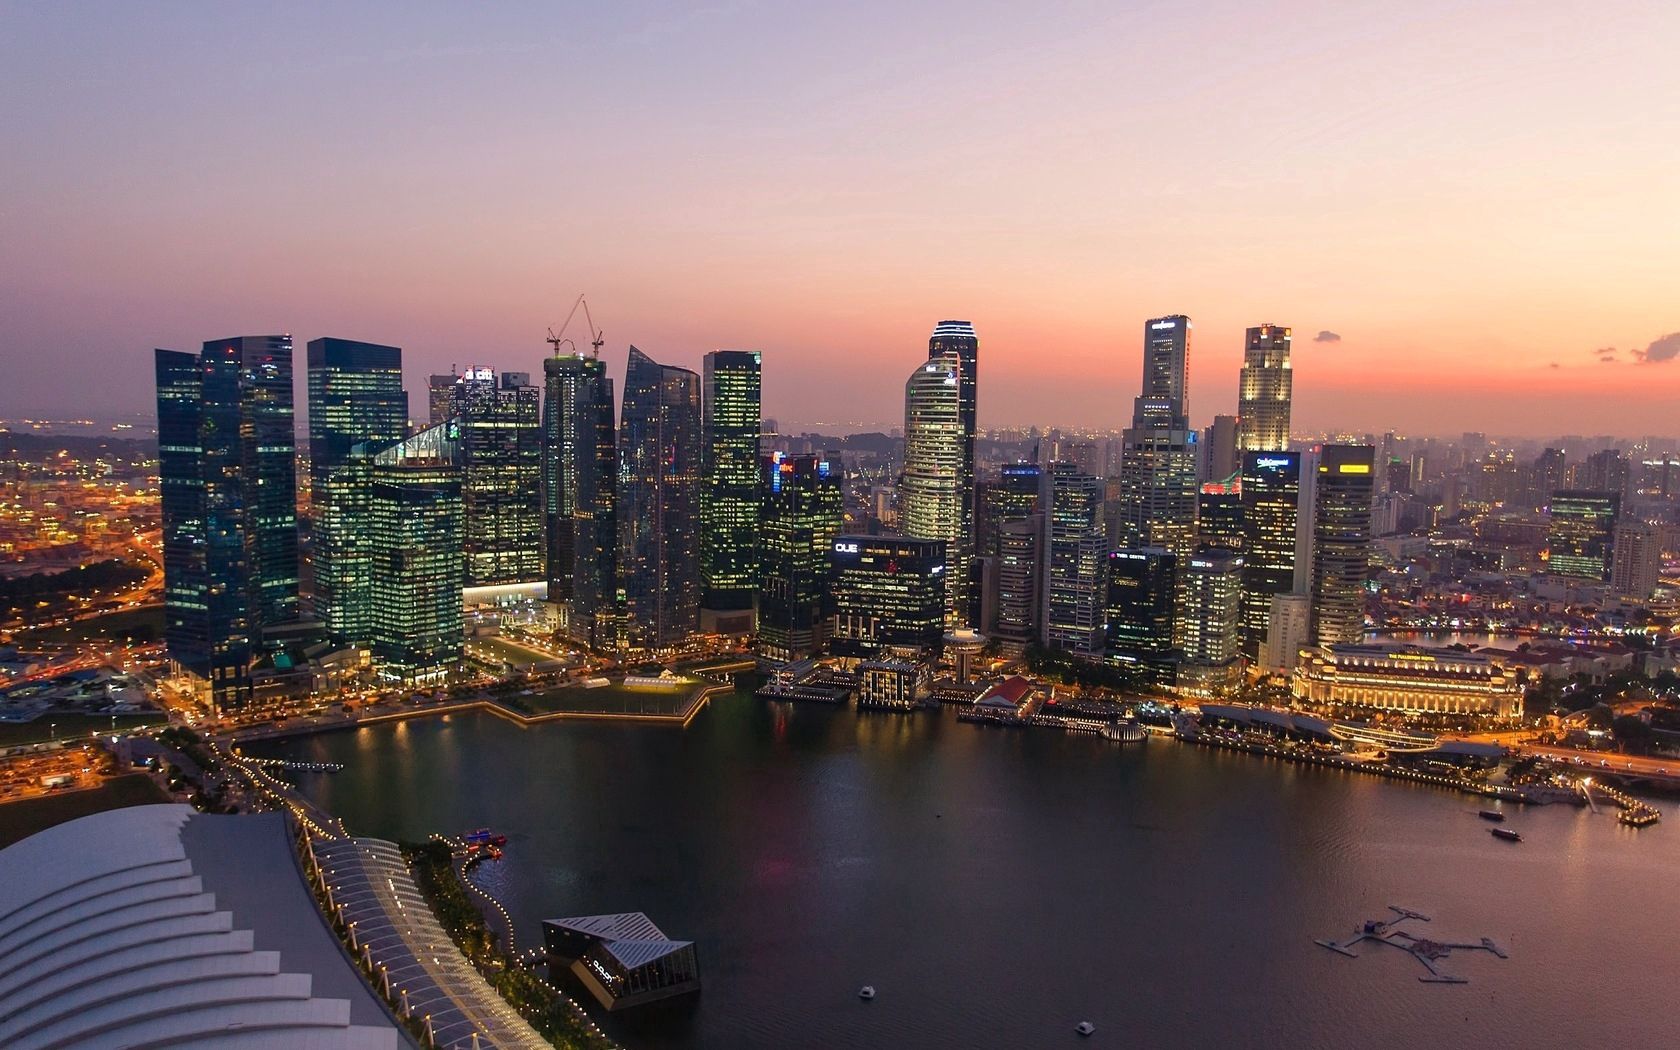 Download PC Wallpaper sunset, cities, rivers, building, skyscrapers, singapore